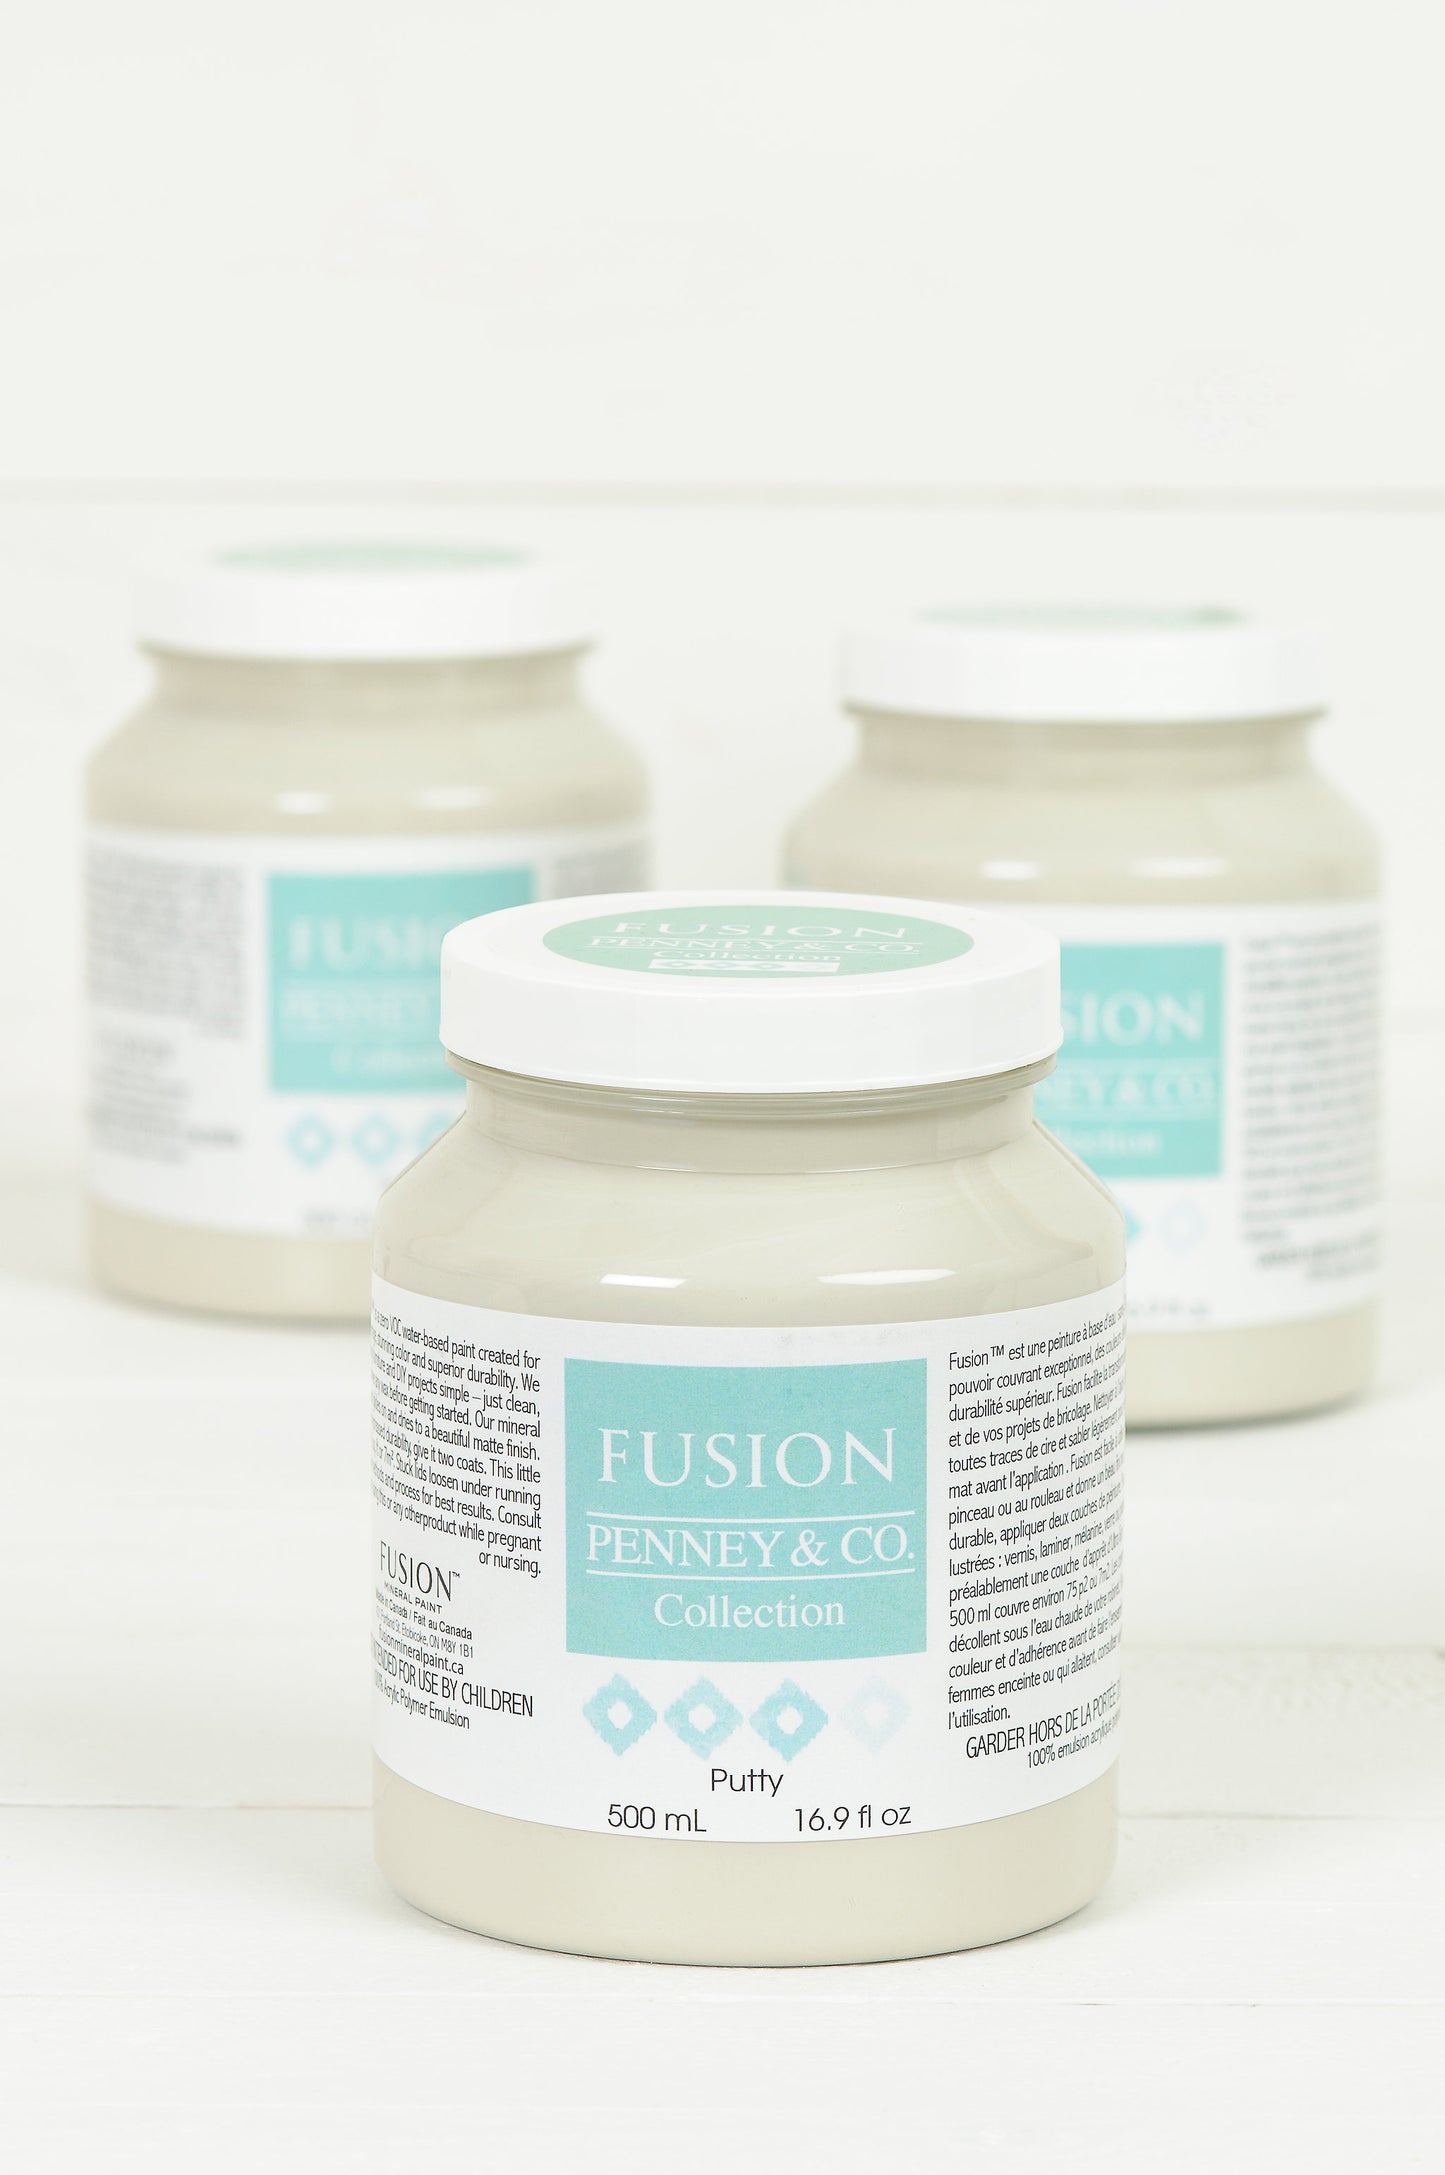 Putty by Fusion